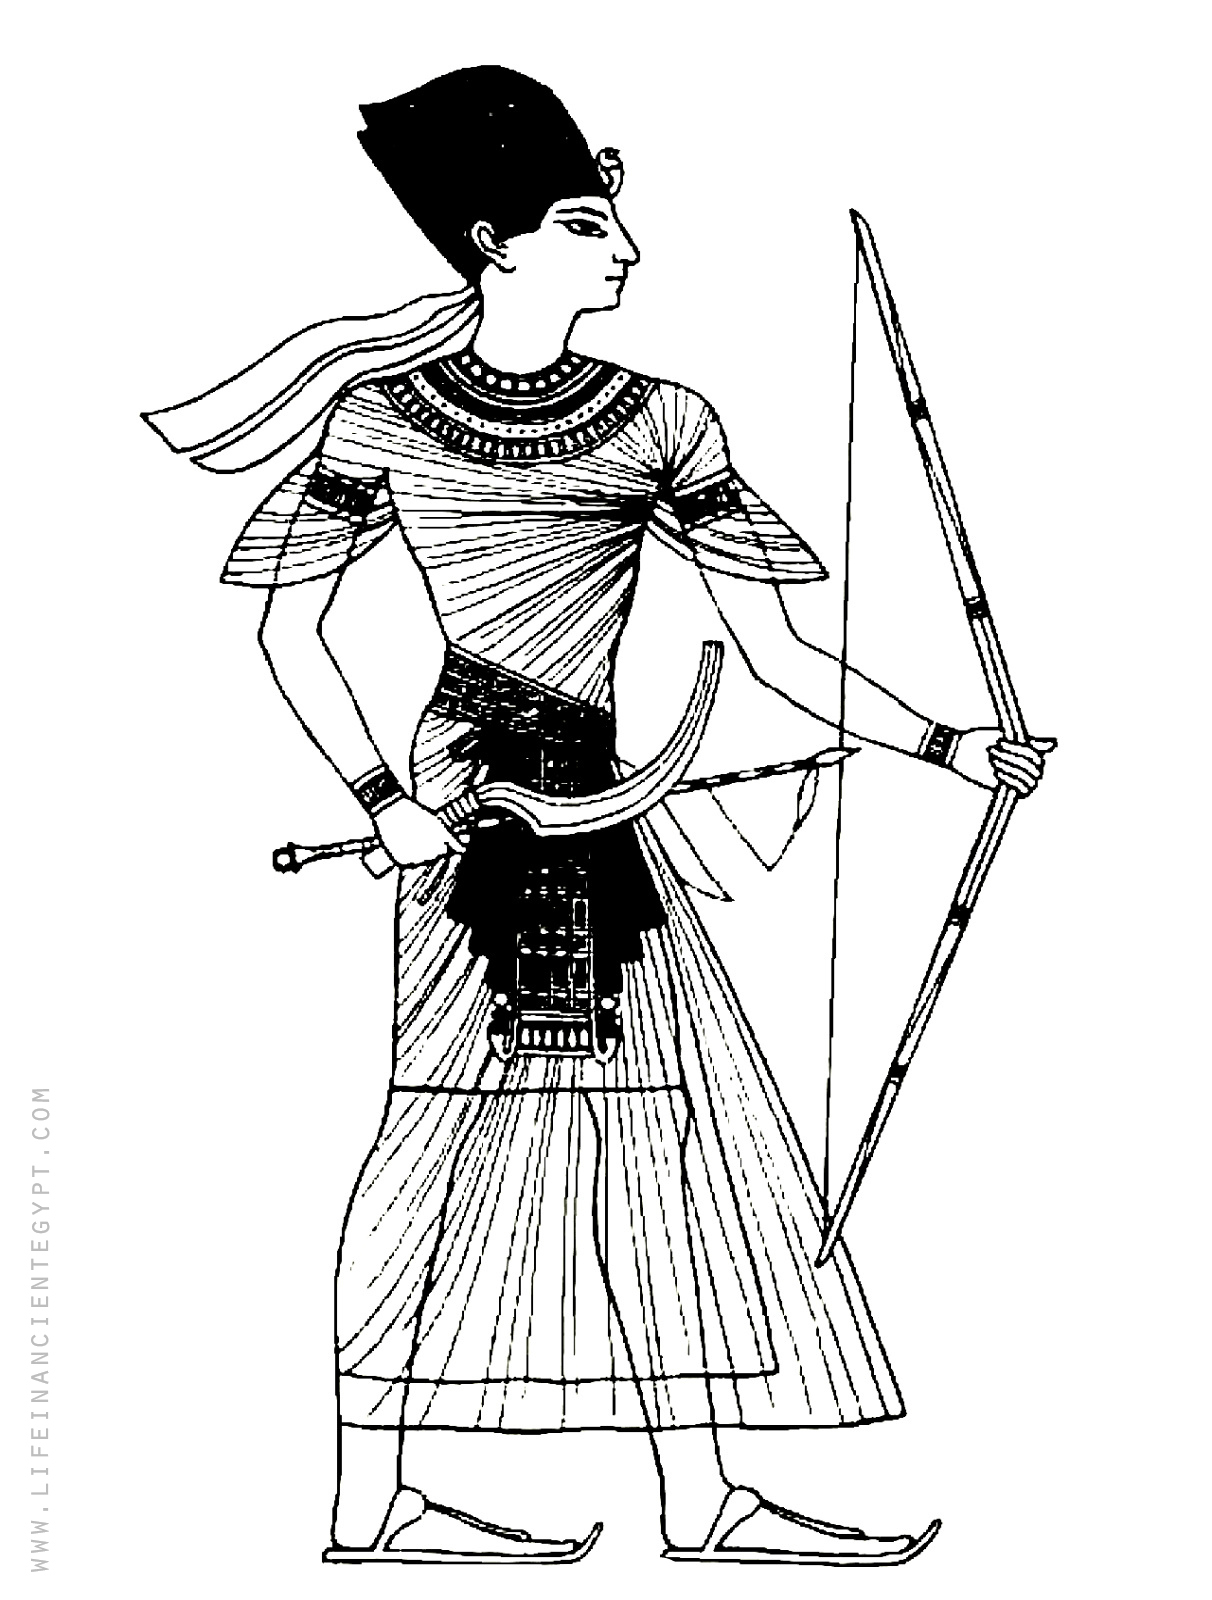 Ancient Egypt Coloring Page: Man with Dagger and Bow and Arrow